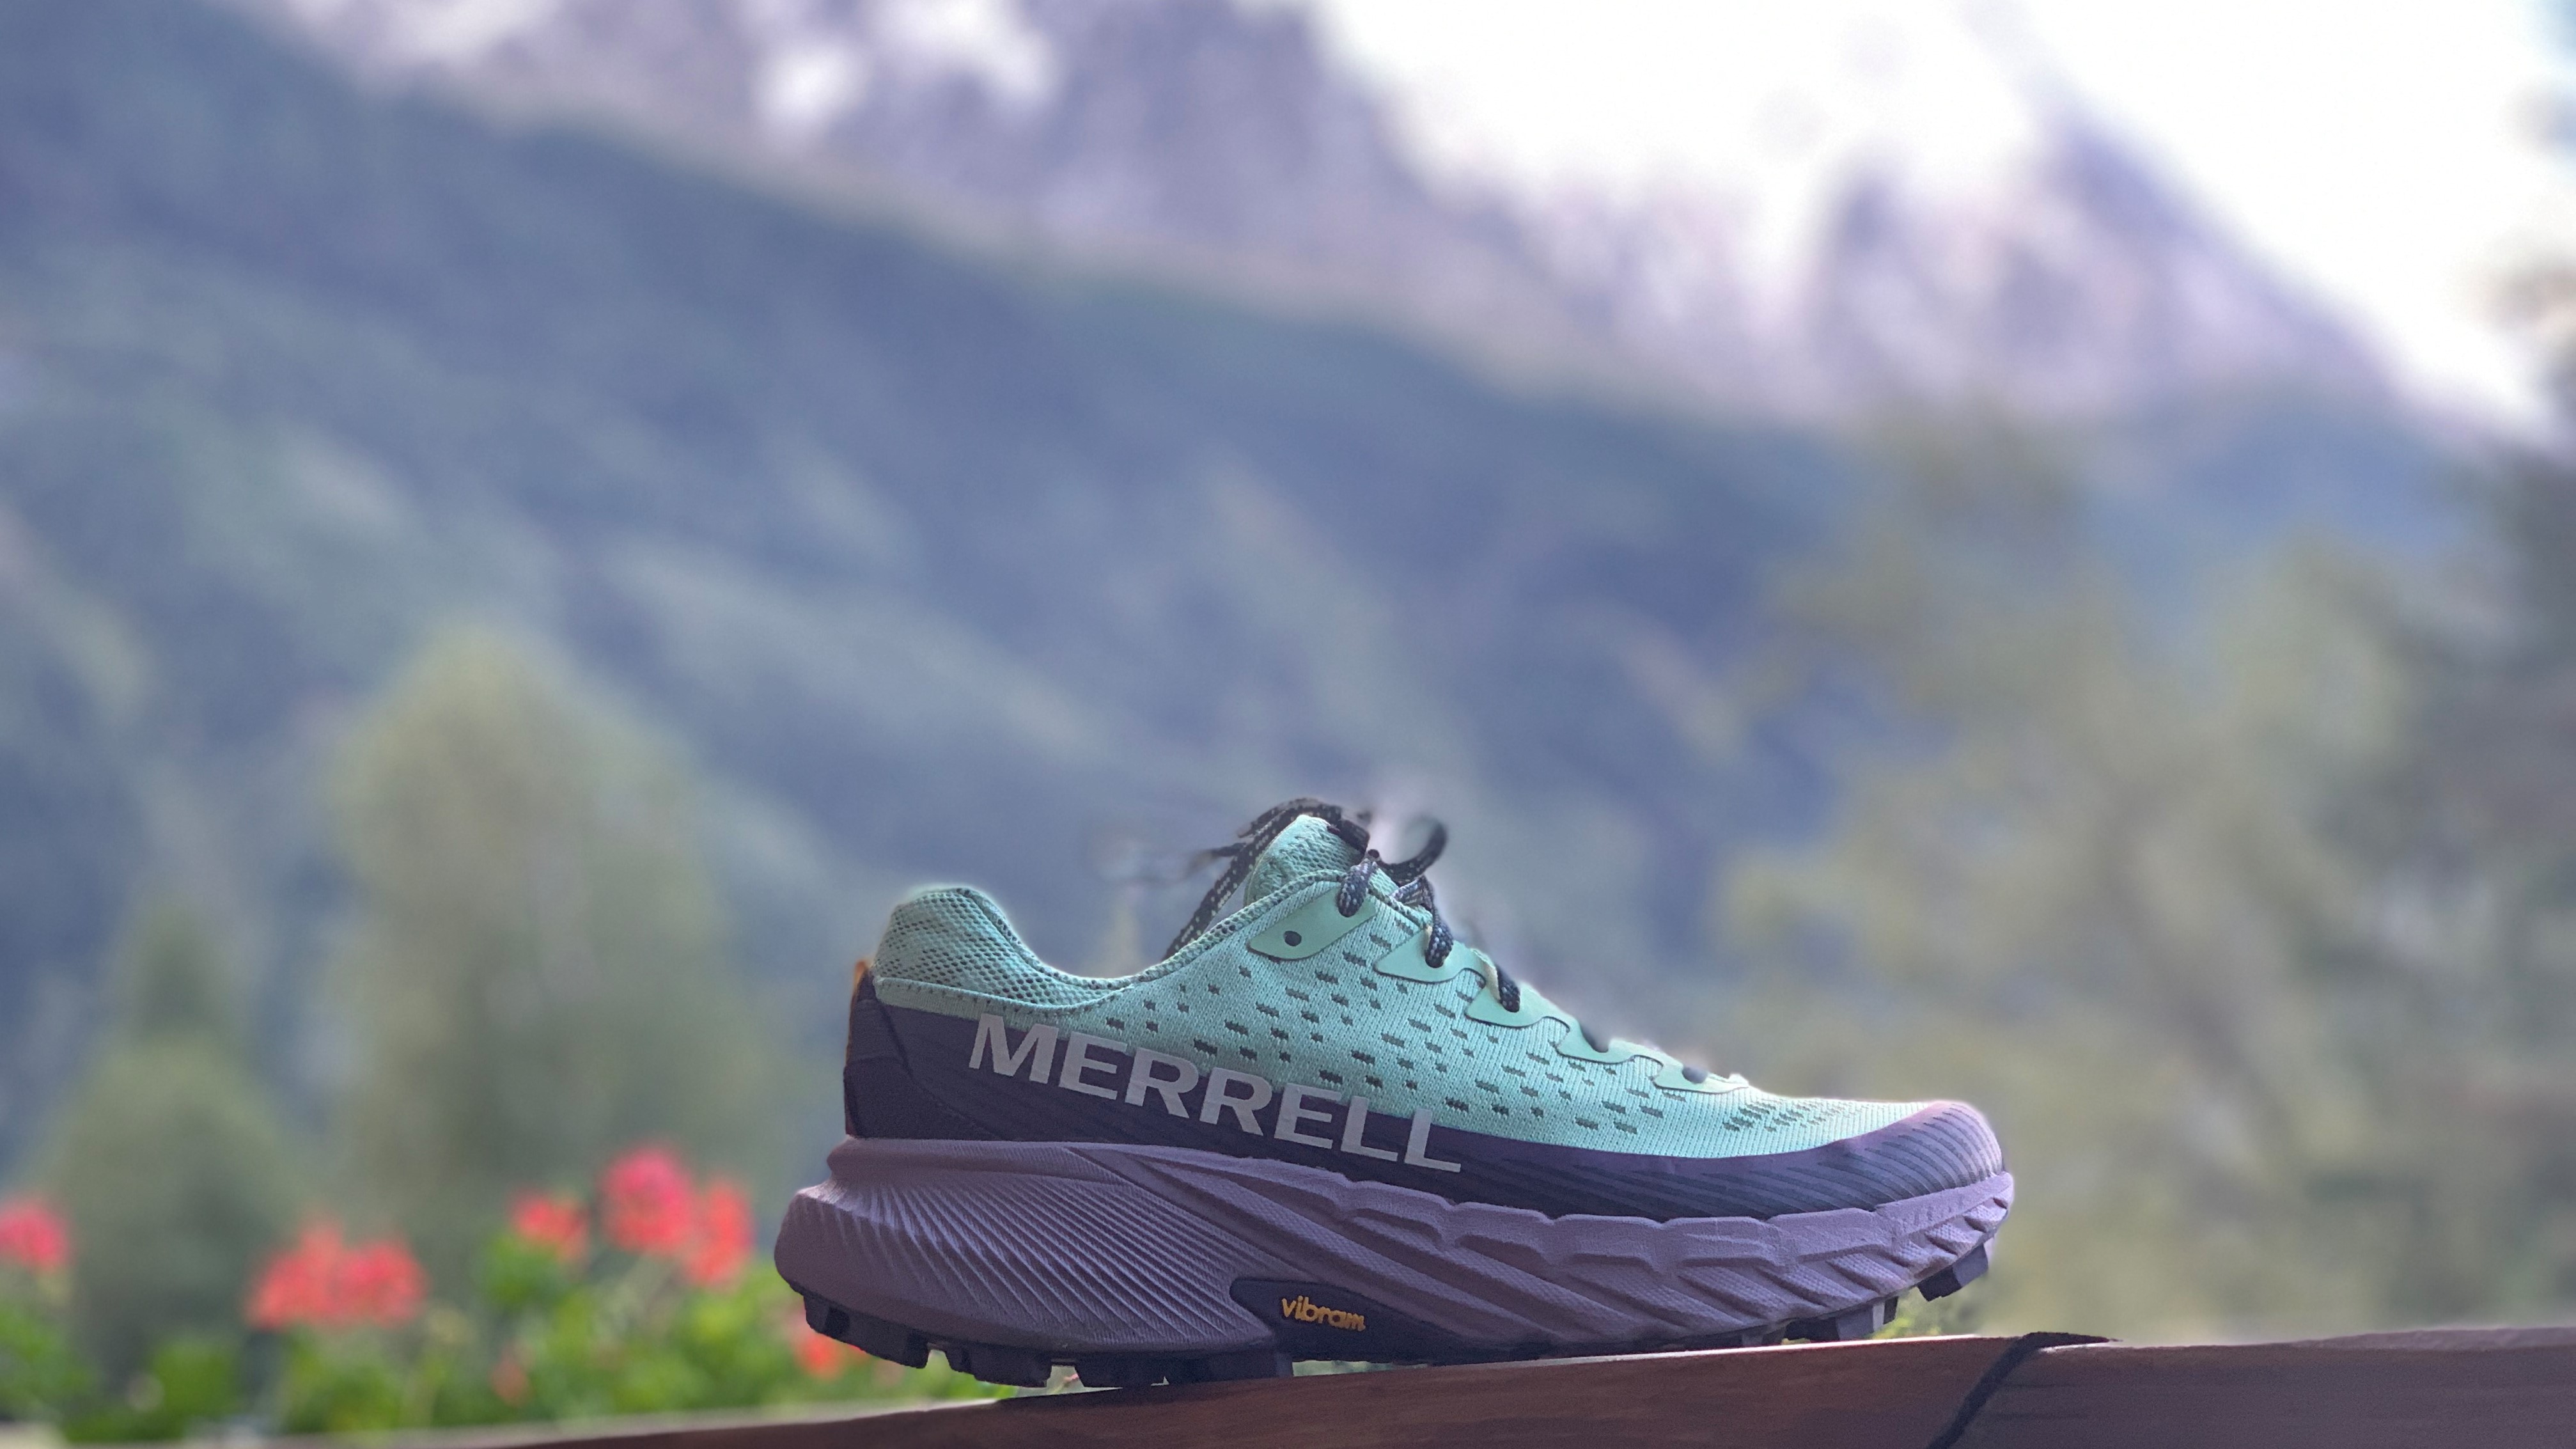 I went trail running in the Alps to test how tough Merrell's newest shoes  really are